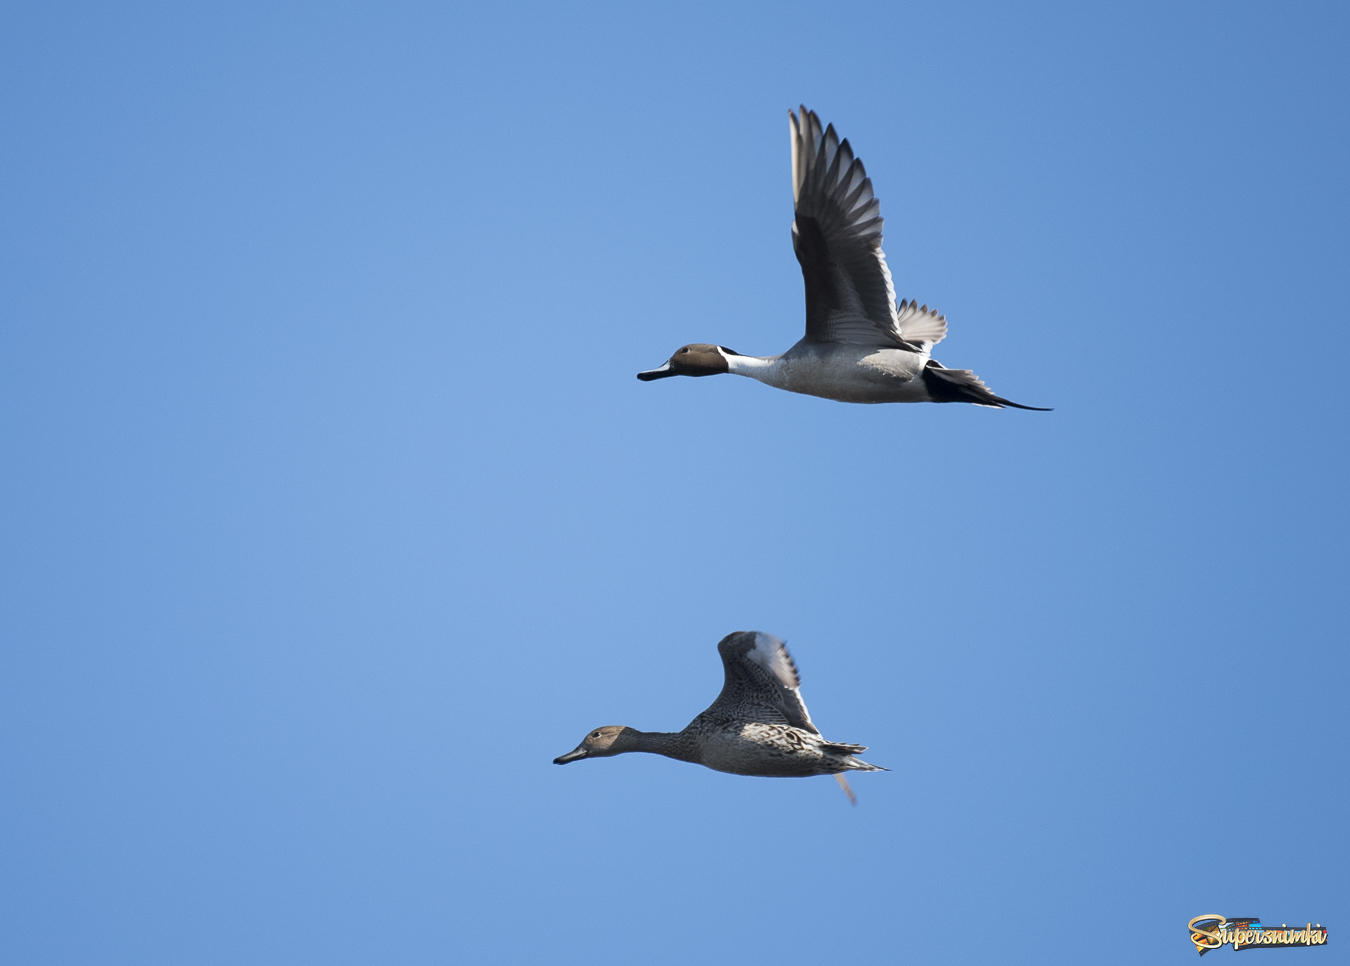 Northern pintail (Spring migration)